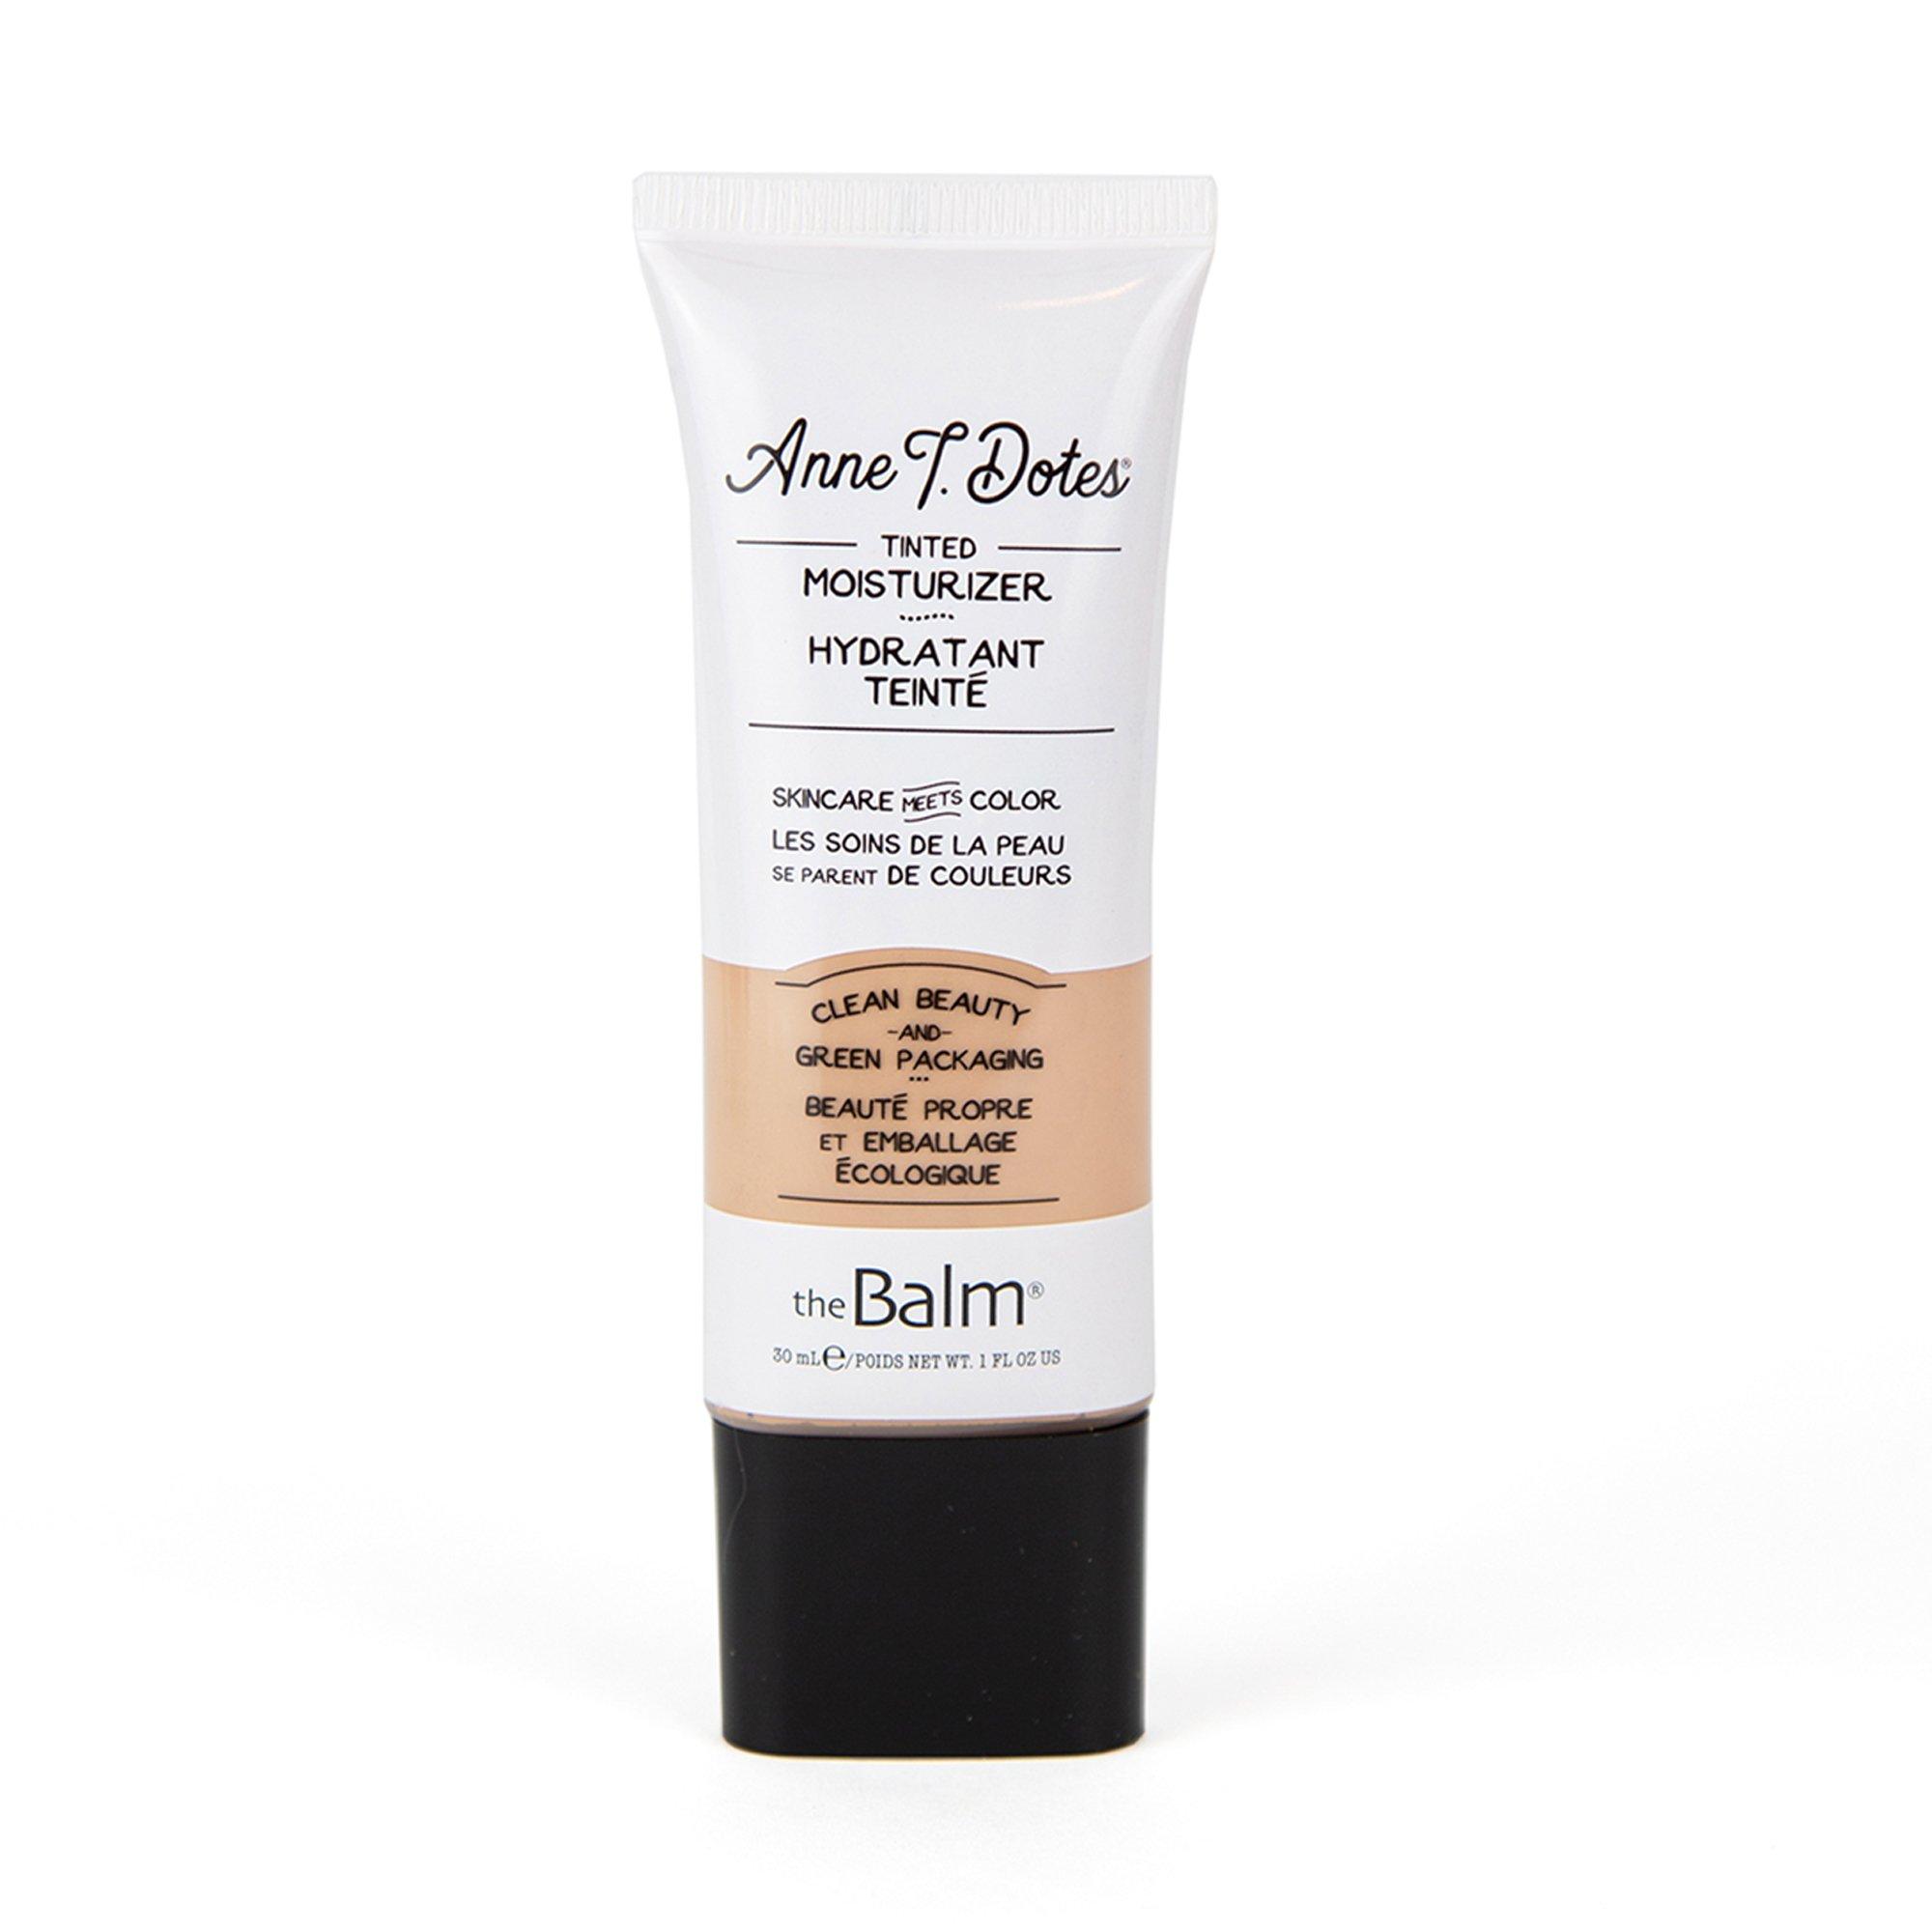 Image of THE BALM Anne T. Dote Tinted Moisturizer